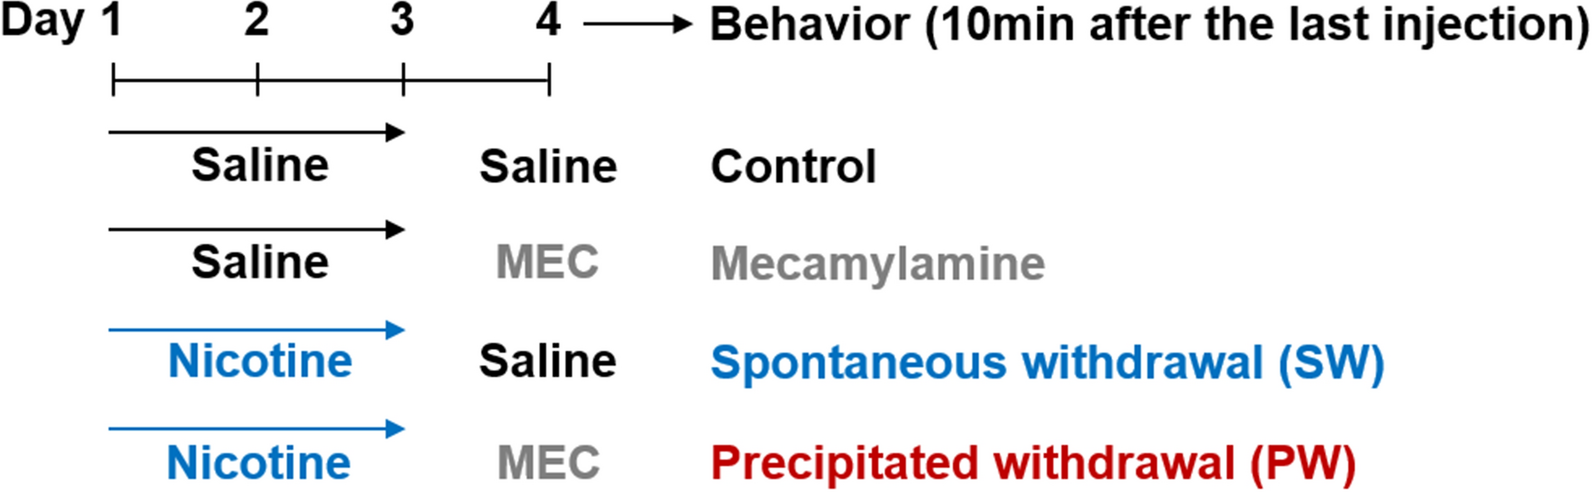 Behavioral characterization of early nicotine withdrawal in the mouse: a potential model of acute dependence